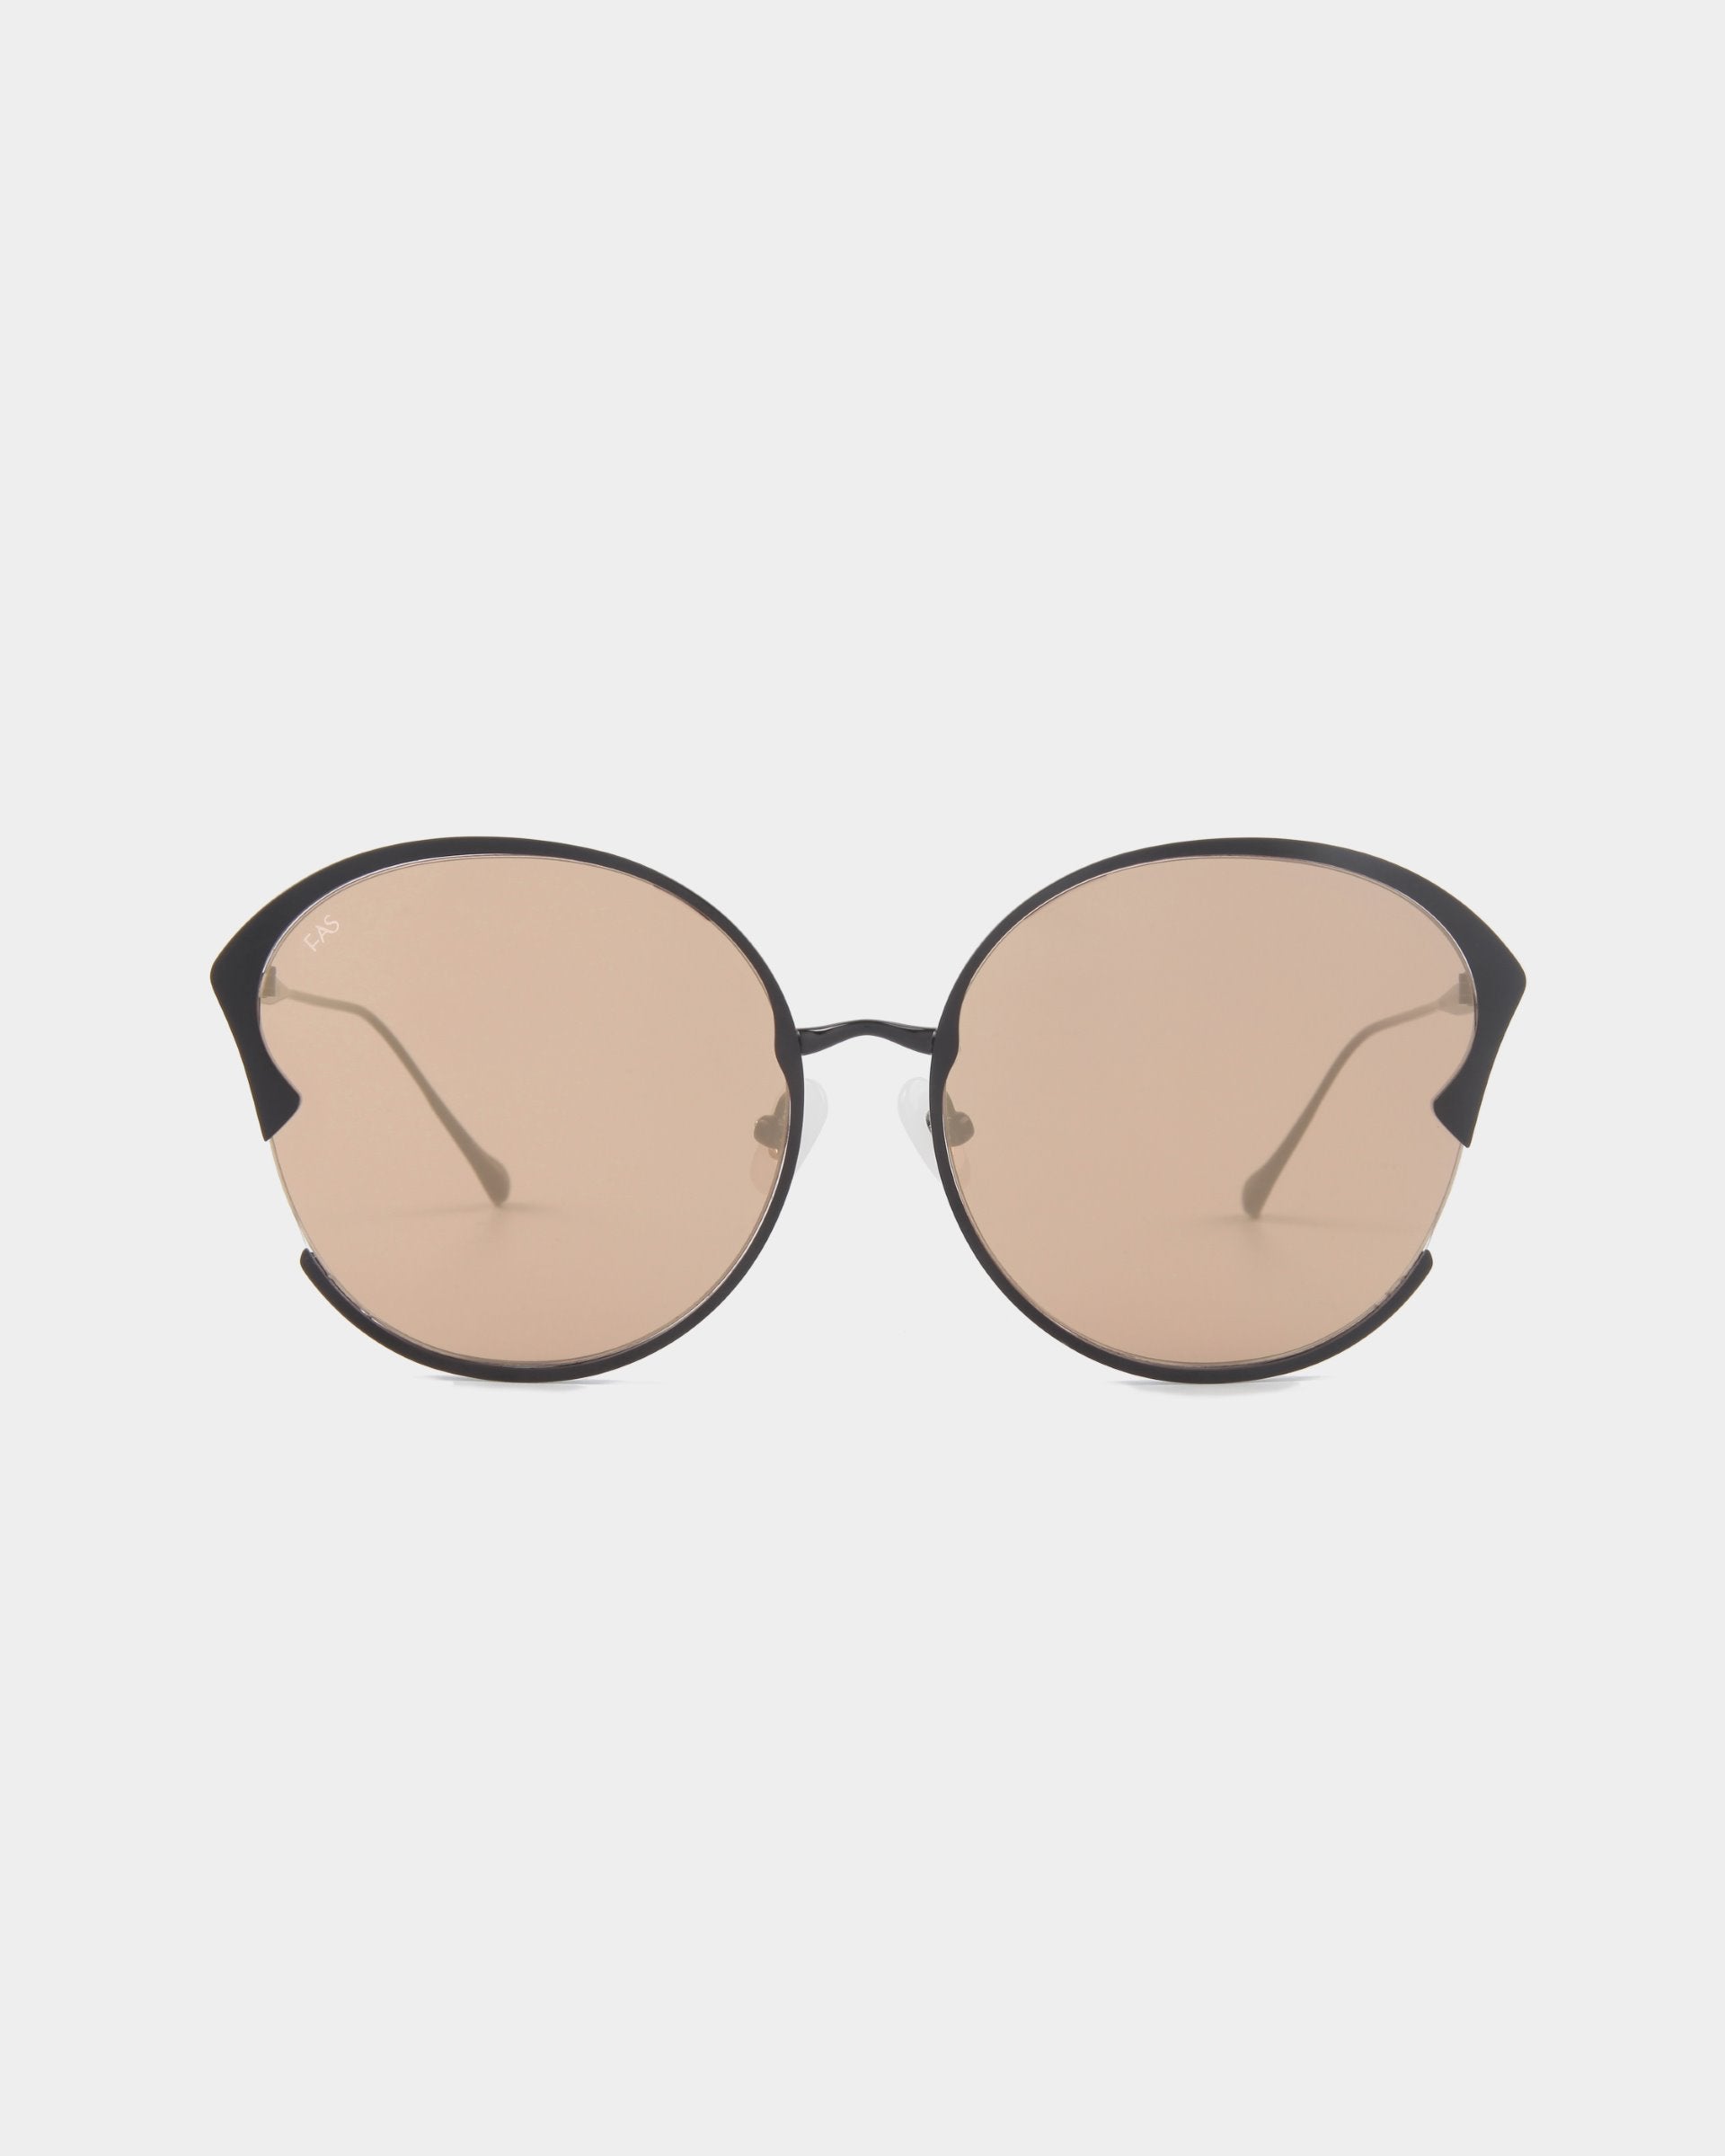 A pair of For Art&#39;s Sake® Alectrona black-framed sunglasses with round, light brown tinted, shatter-resistant lenses on a white background. The frames have a sleek design with thin arms and adjustable jade nose pads.